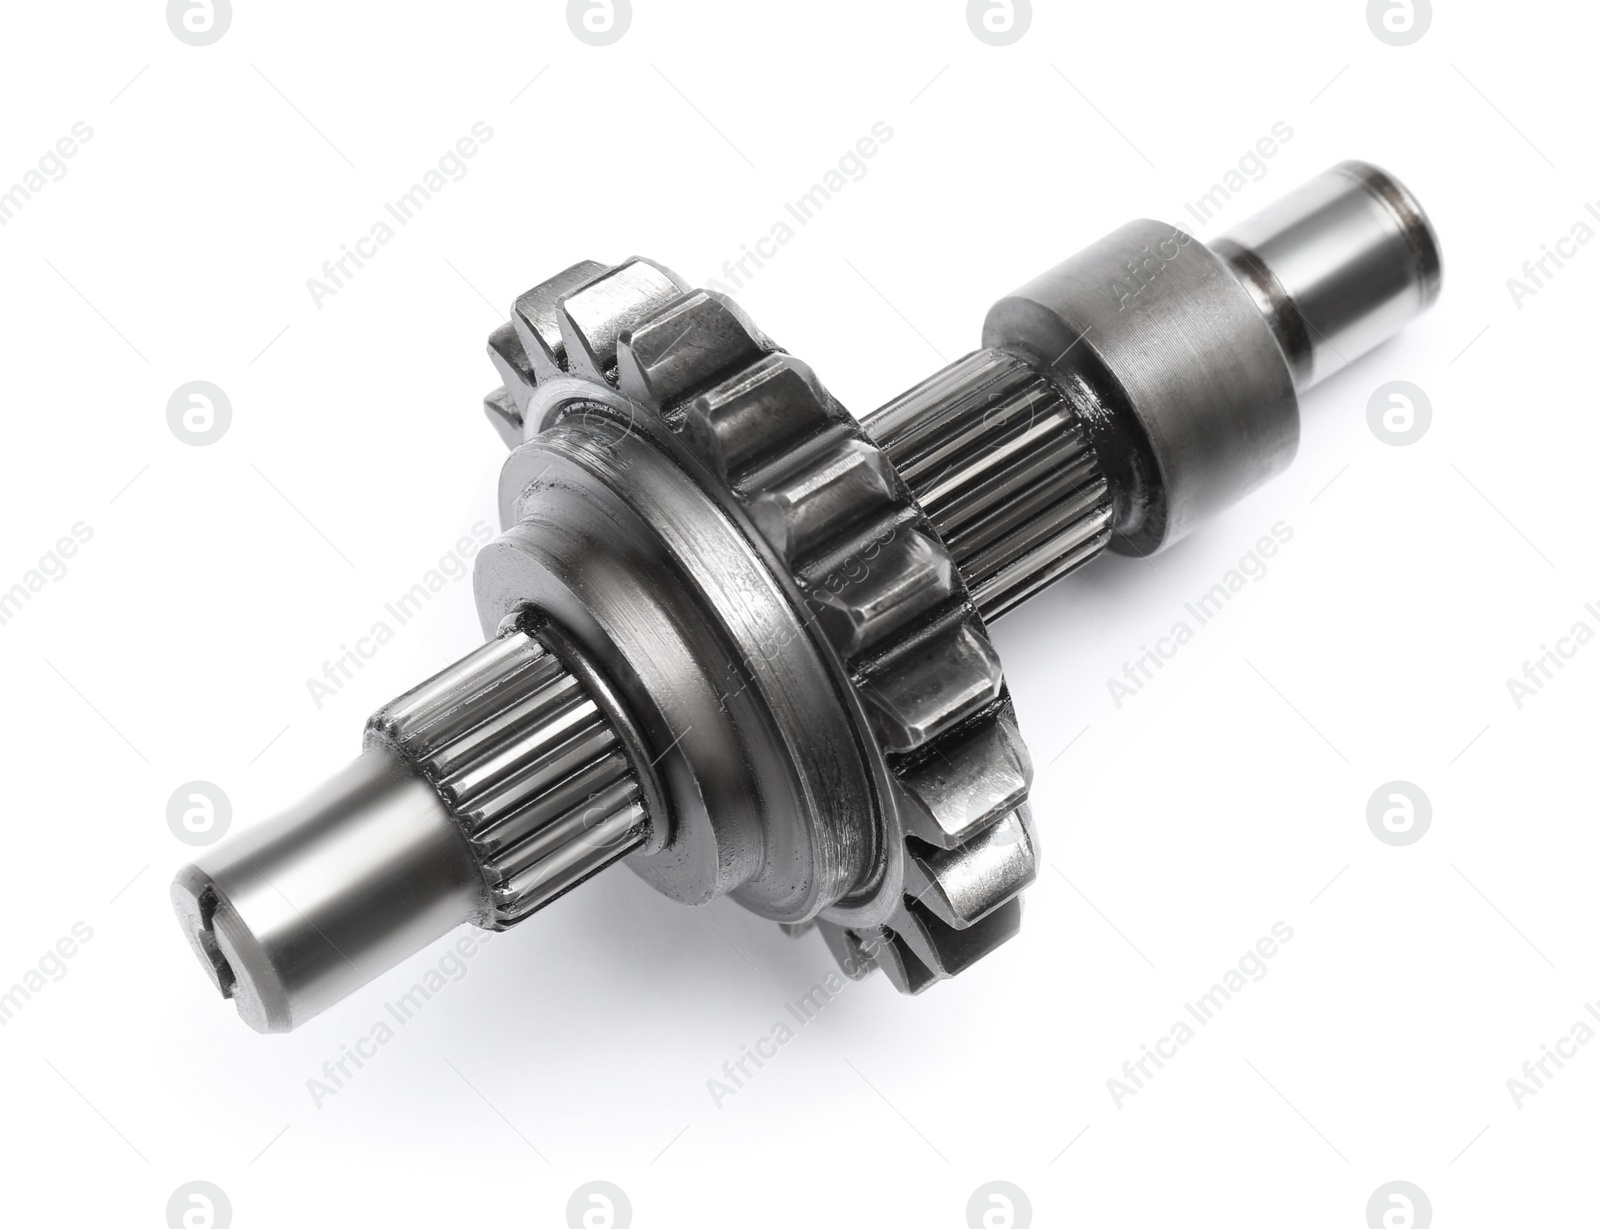 Photo of Stainless spur gear shaft isolated on white